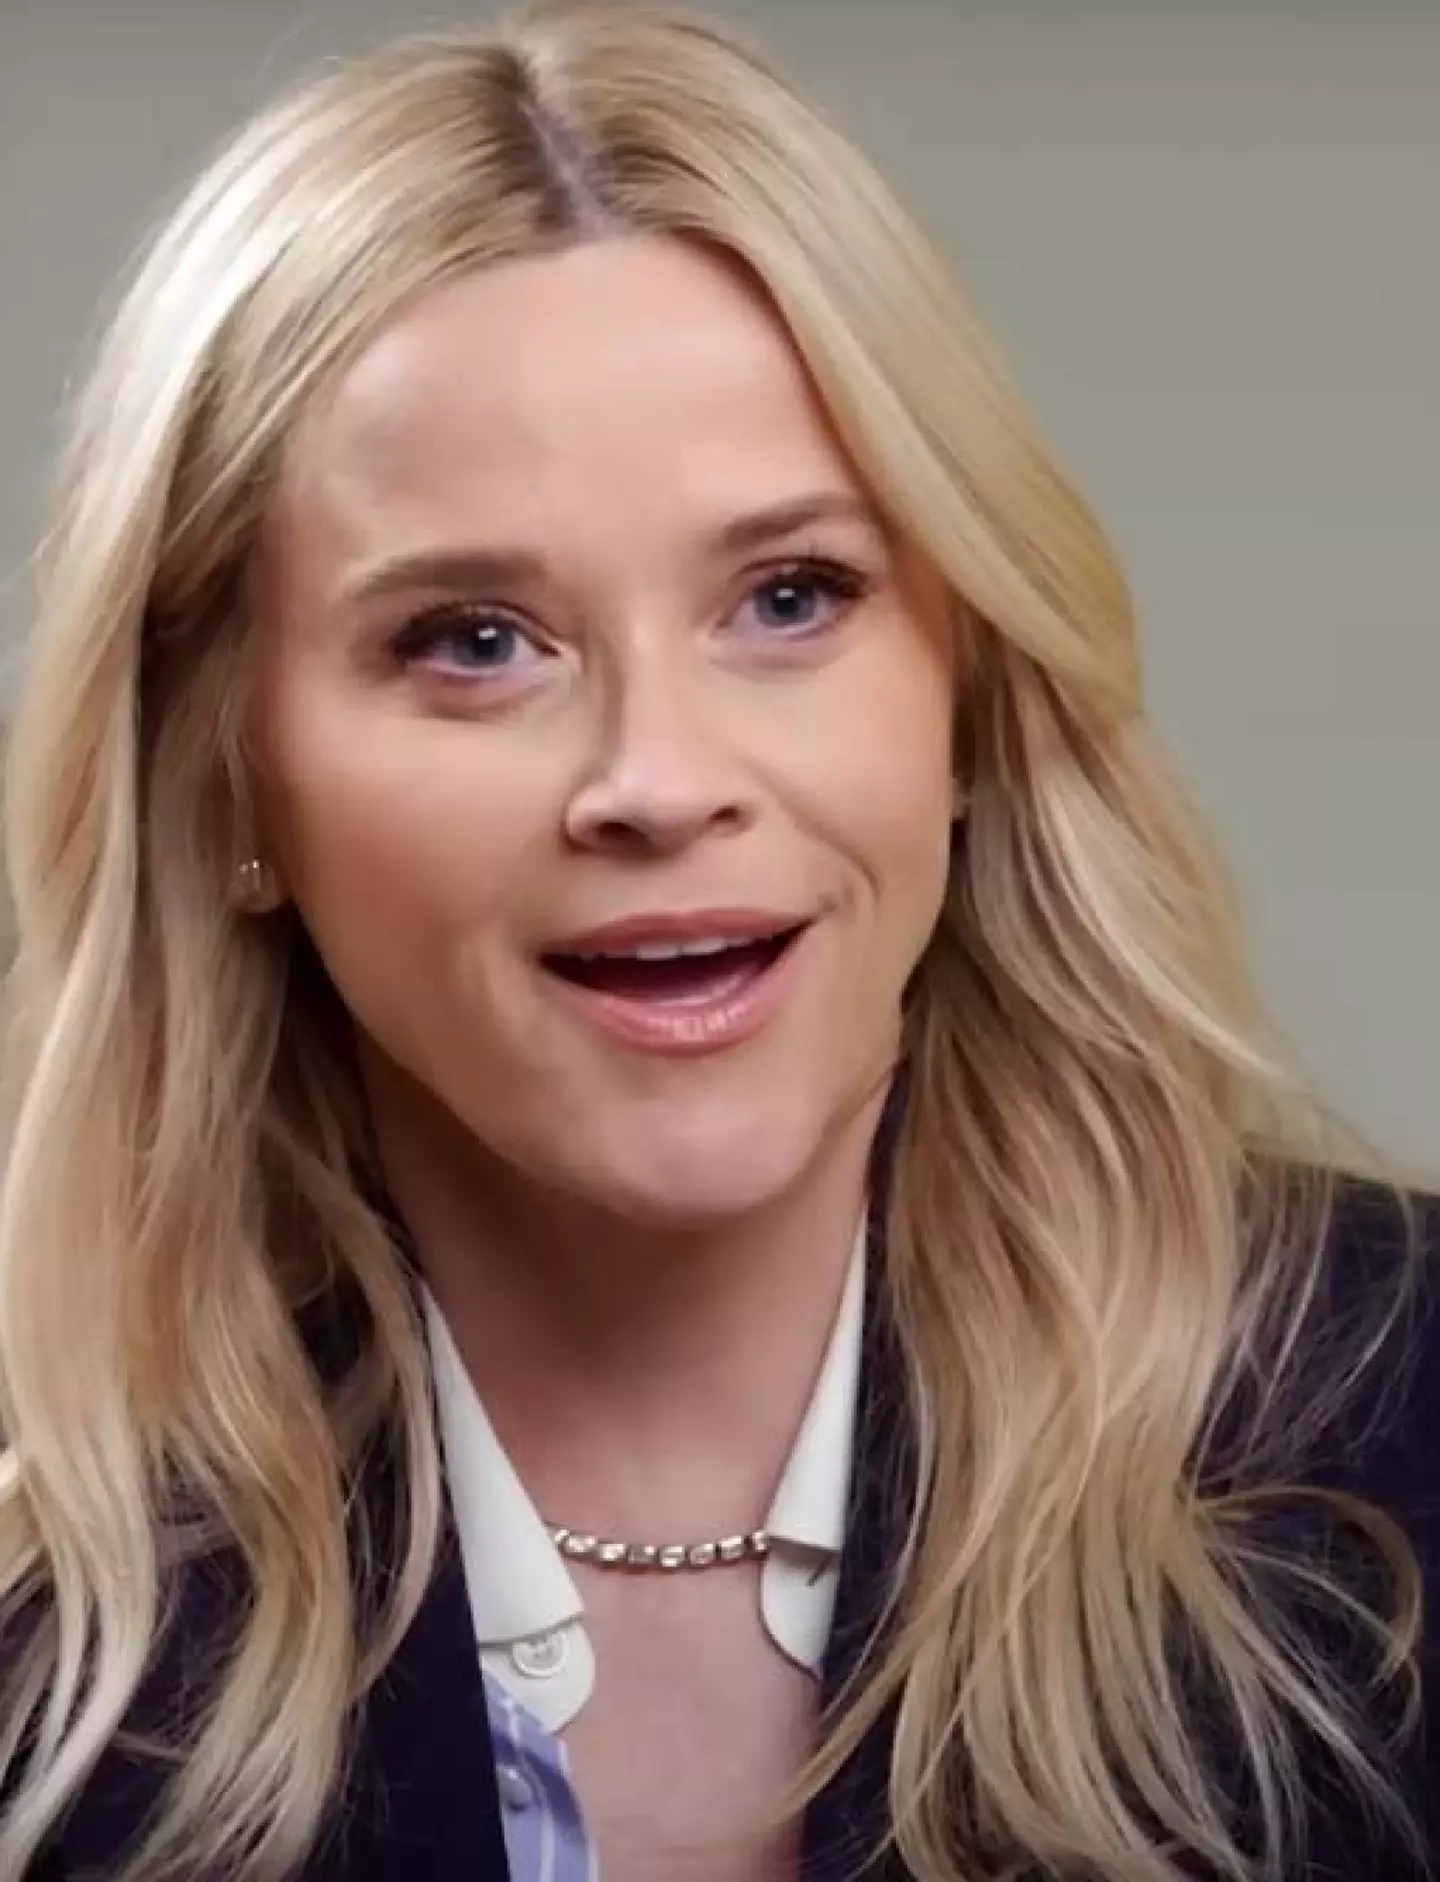 People have been left shocked after finding out Witherspoon's real name. (YouTube/Vanity Fair)